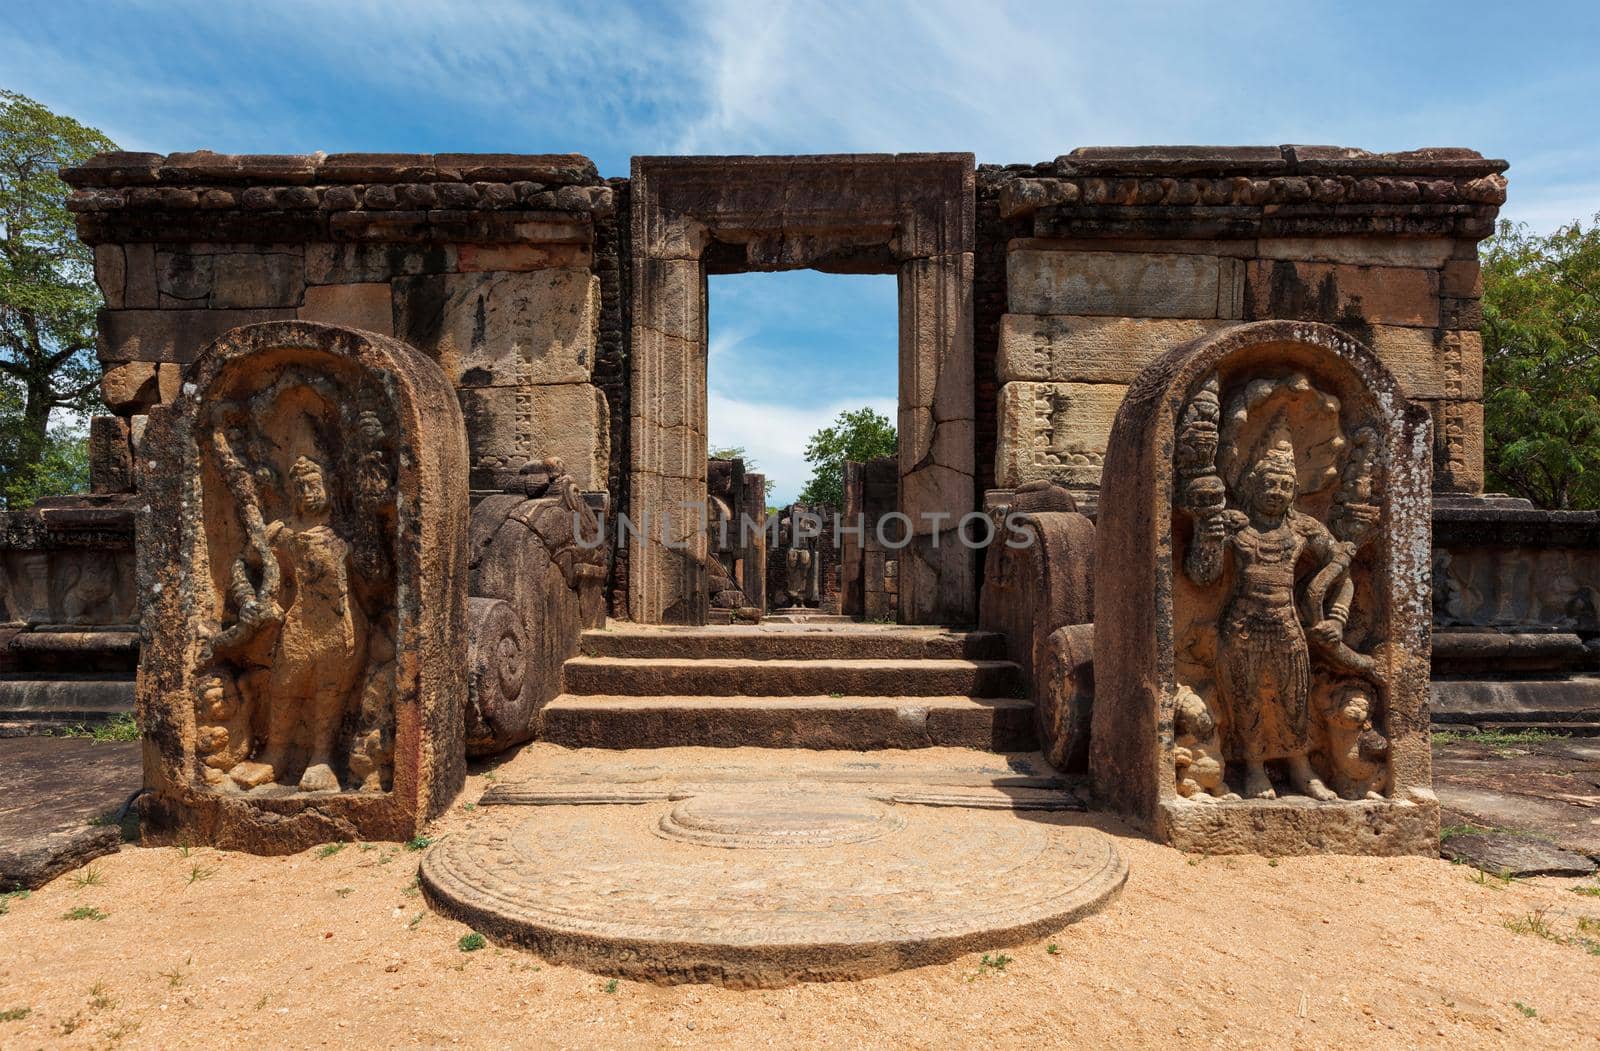 Entrance with stairs with moonstone in ruins in Quadrangle group in ancient city Pollonaruwa - famous tourist destination and archaelogical site, Sri Lanka